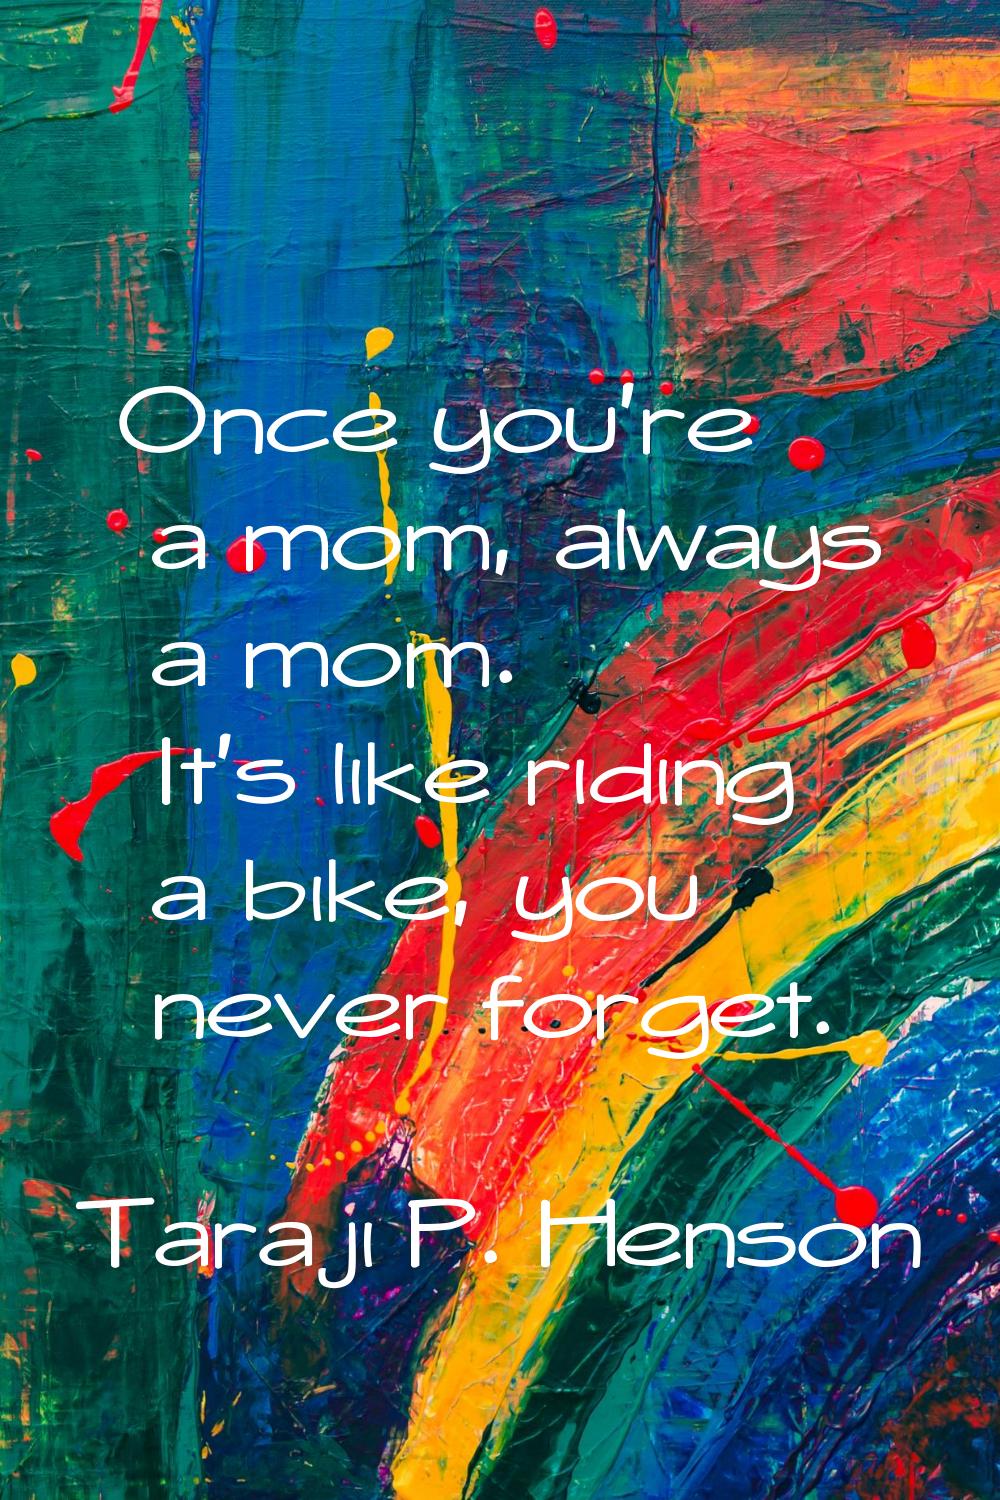 Once you're a mom, always a mom. It's like riding a bike, you never forget.